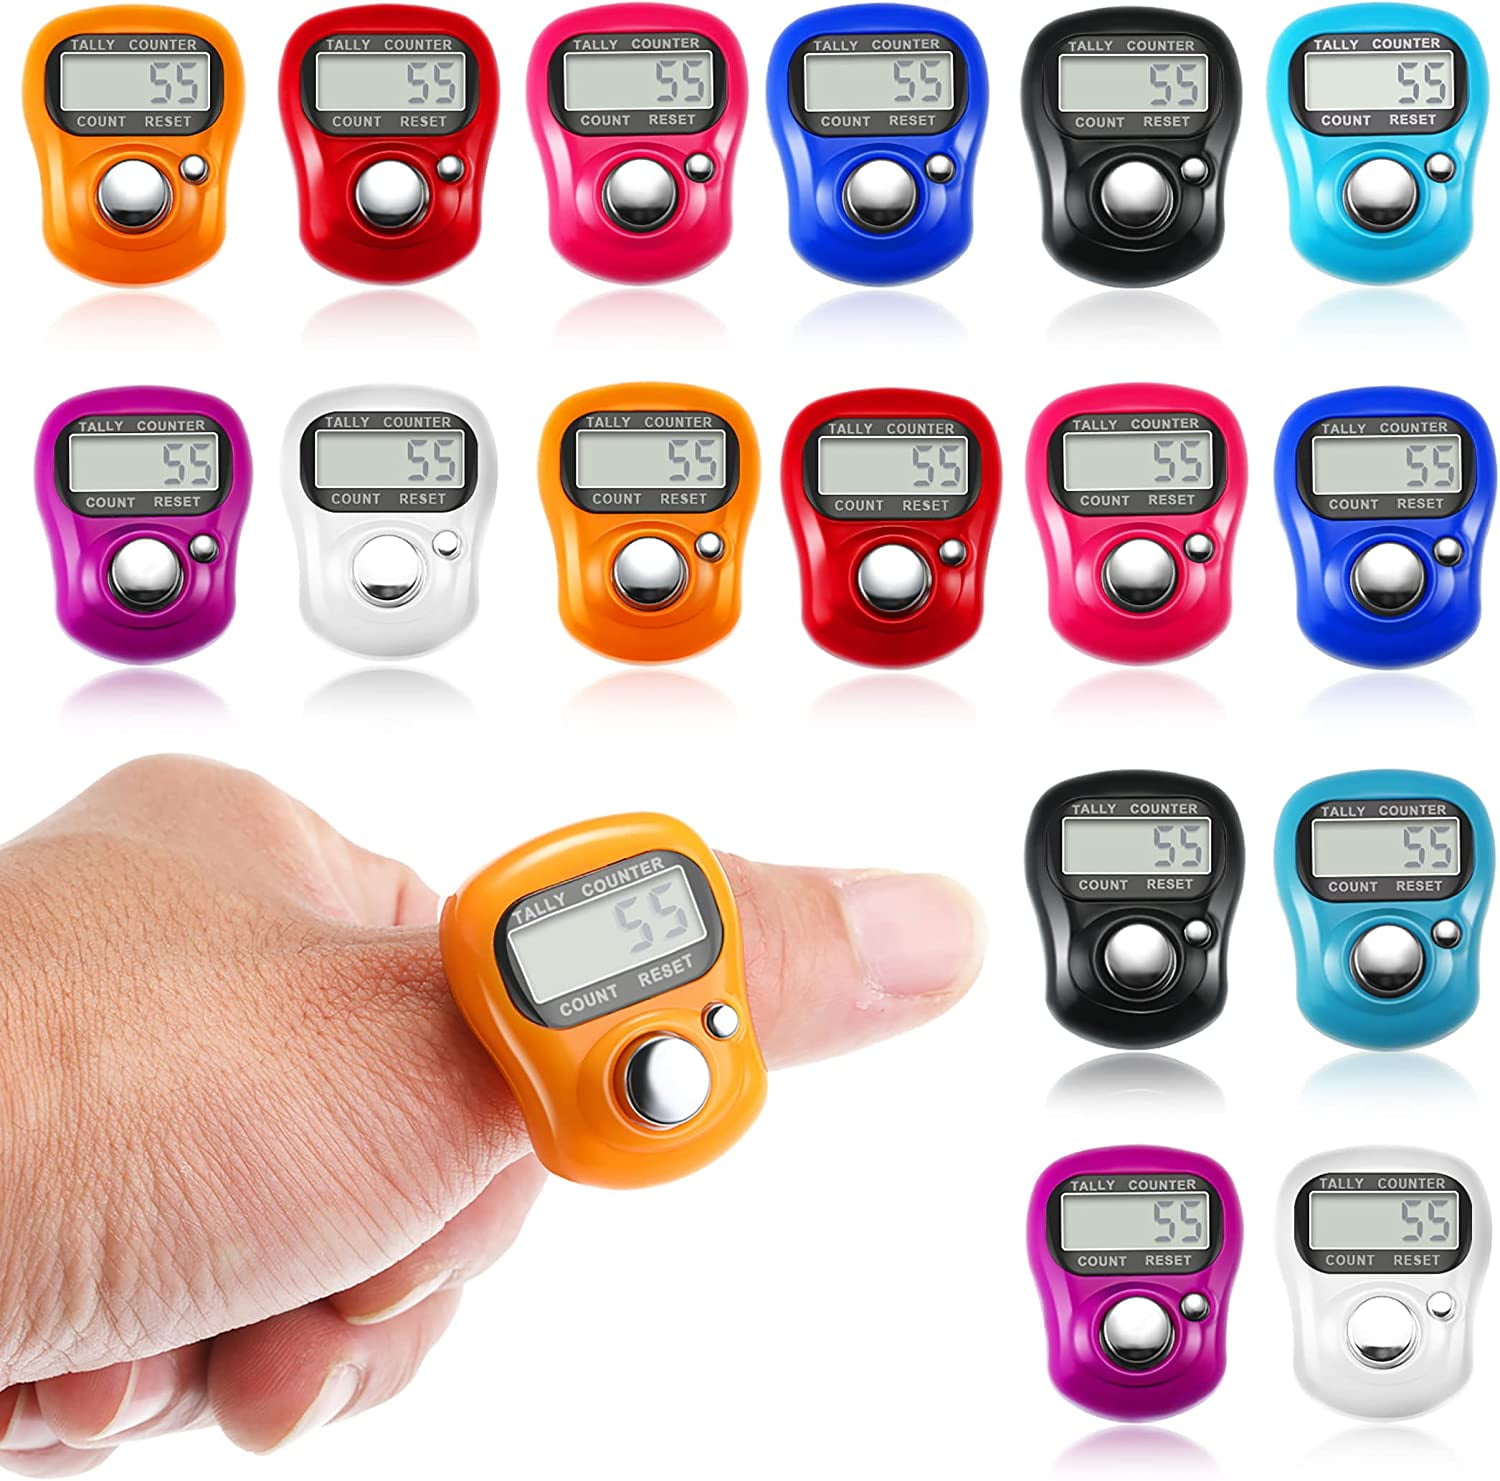 FreshDcart 5-Digit Tally Clicker Counter Finger Clicker Ring Electronic  Light Digital Counting Machine for Cricket